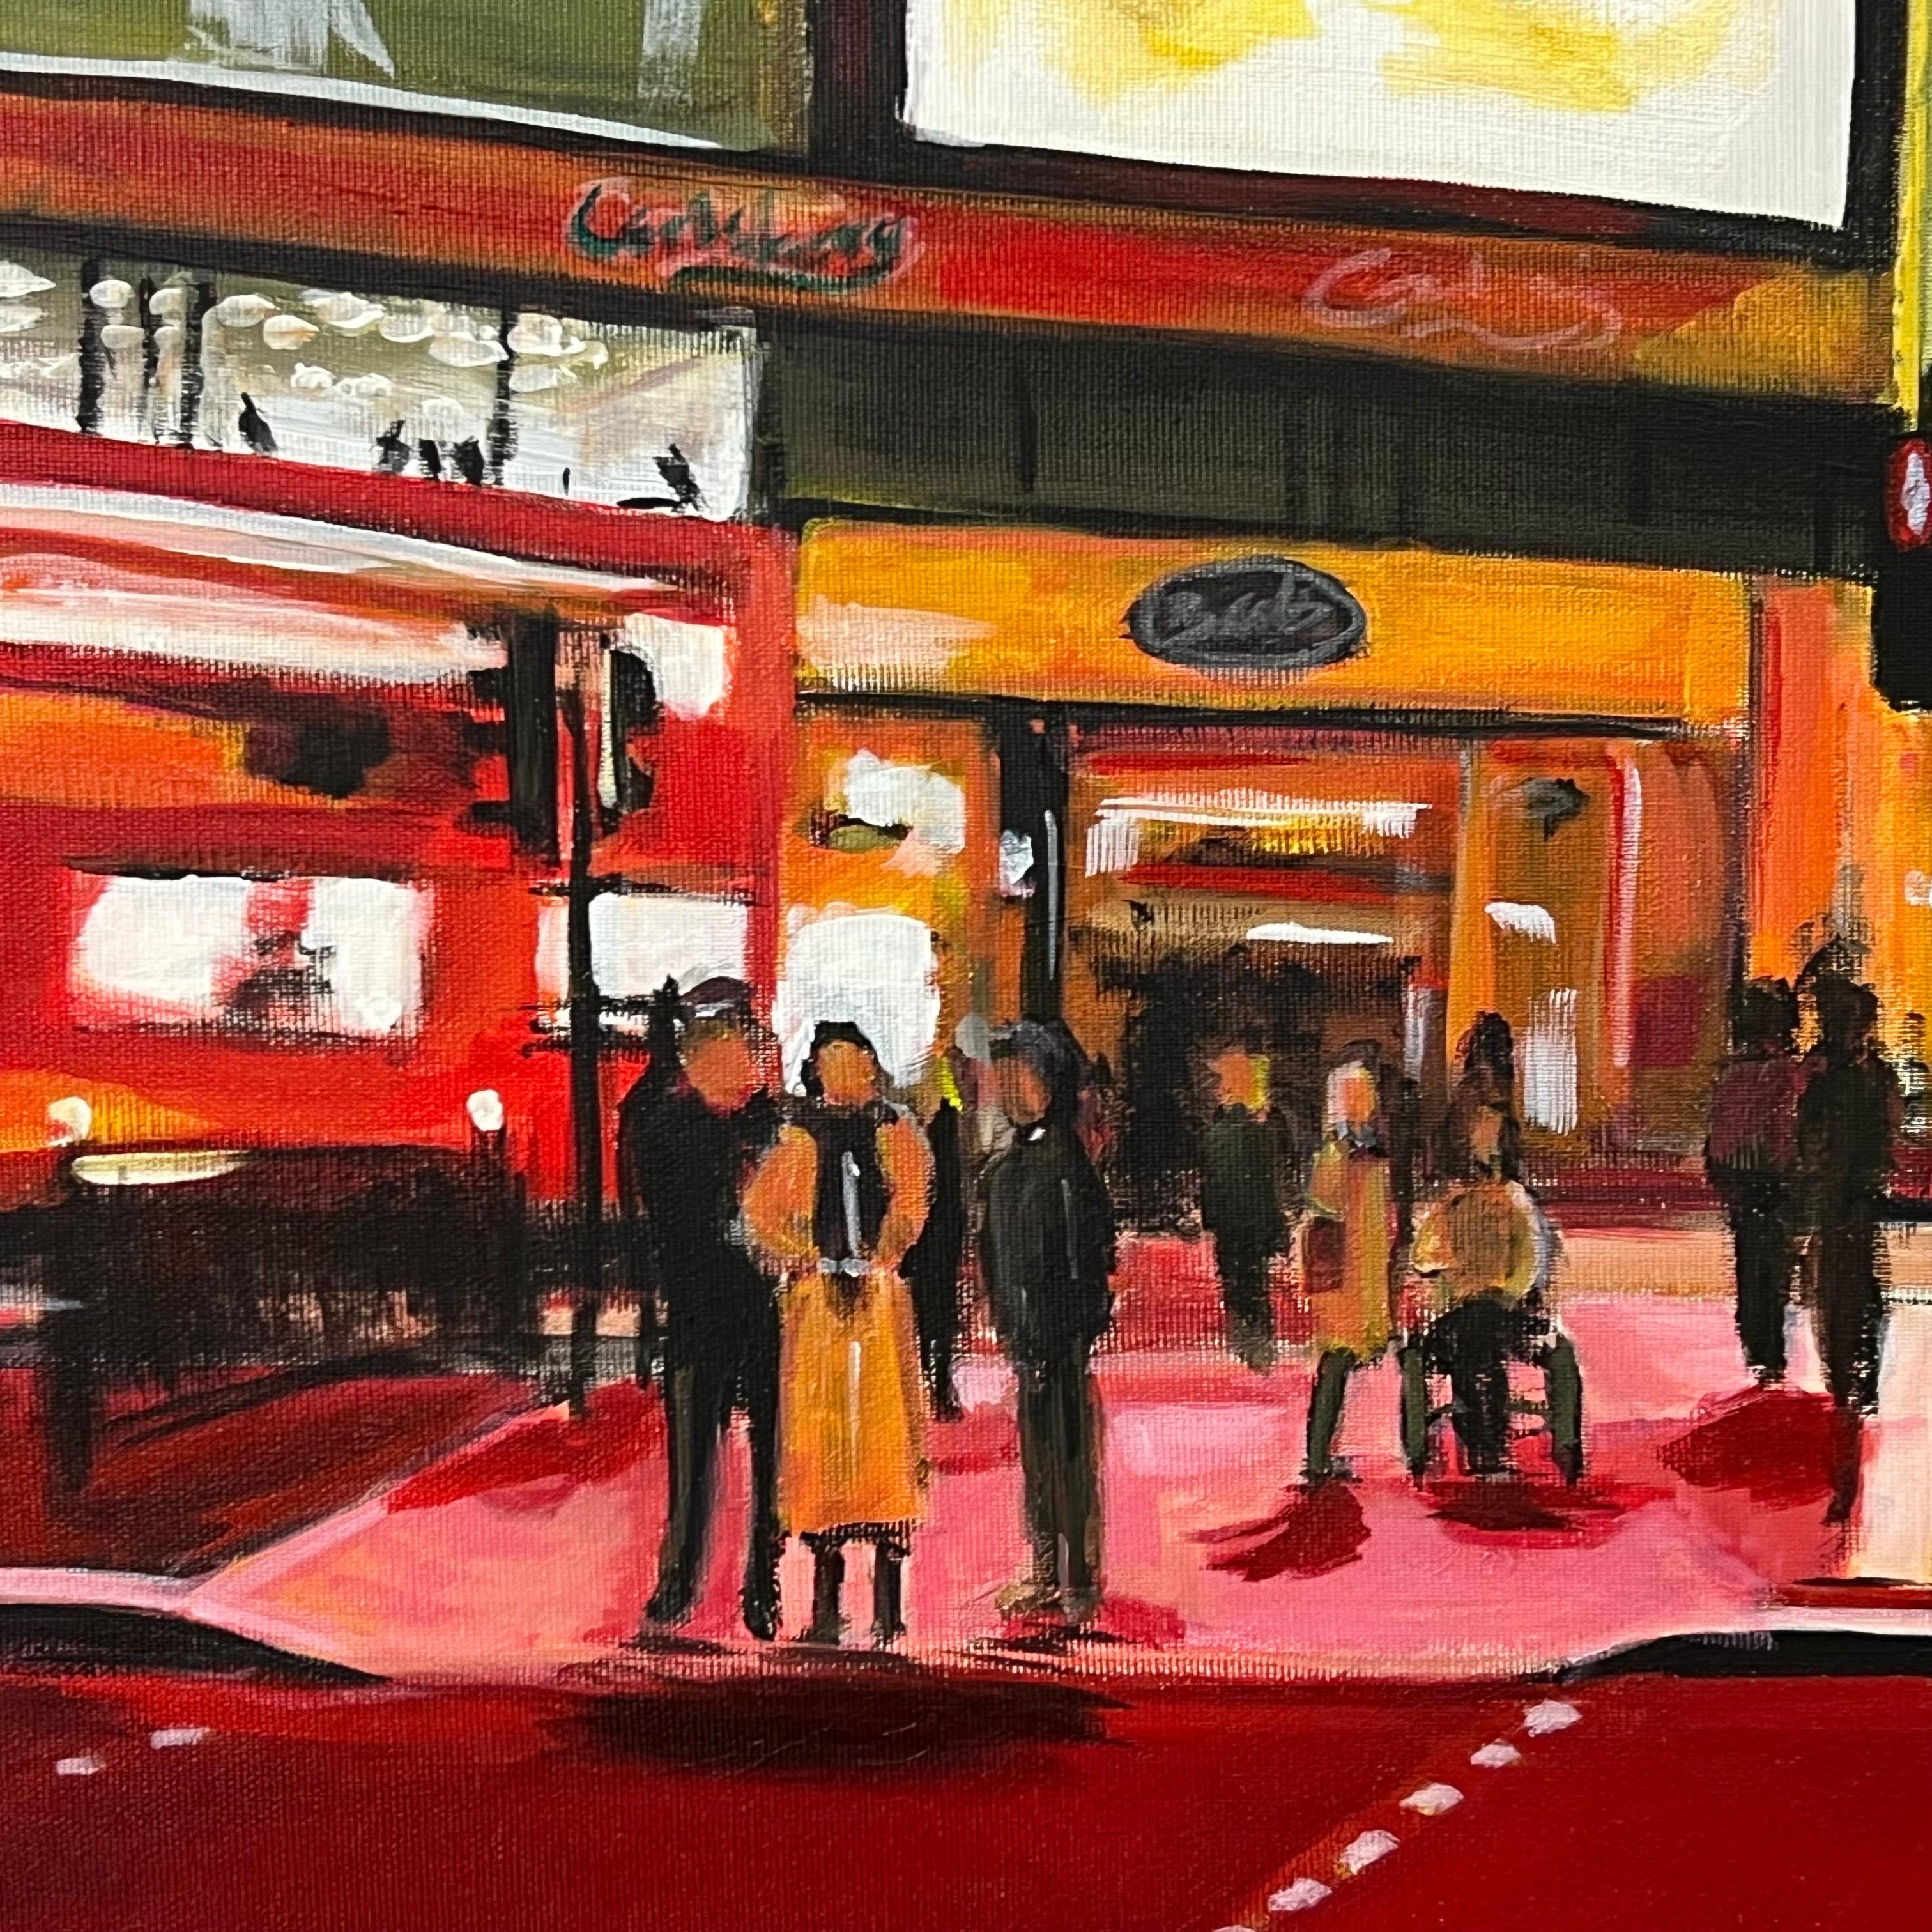 Piccadilly Circus in London City at Night with Red Bus by Urban Landscape Artist For Sale 5